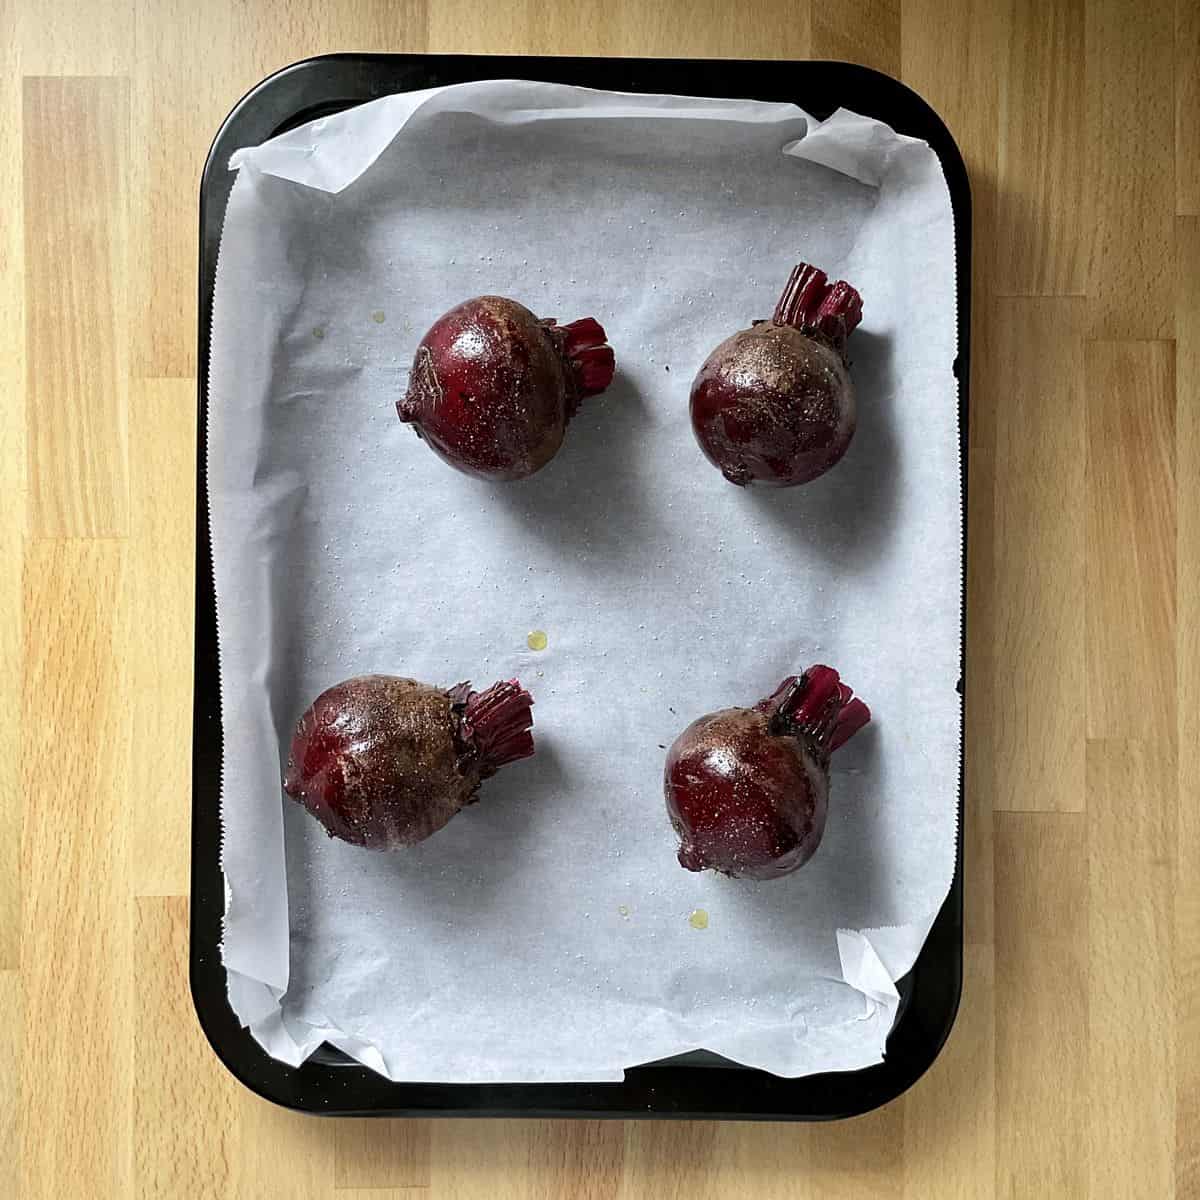 Fresh beets on paper-lined baking sheet.